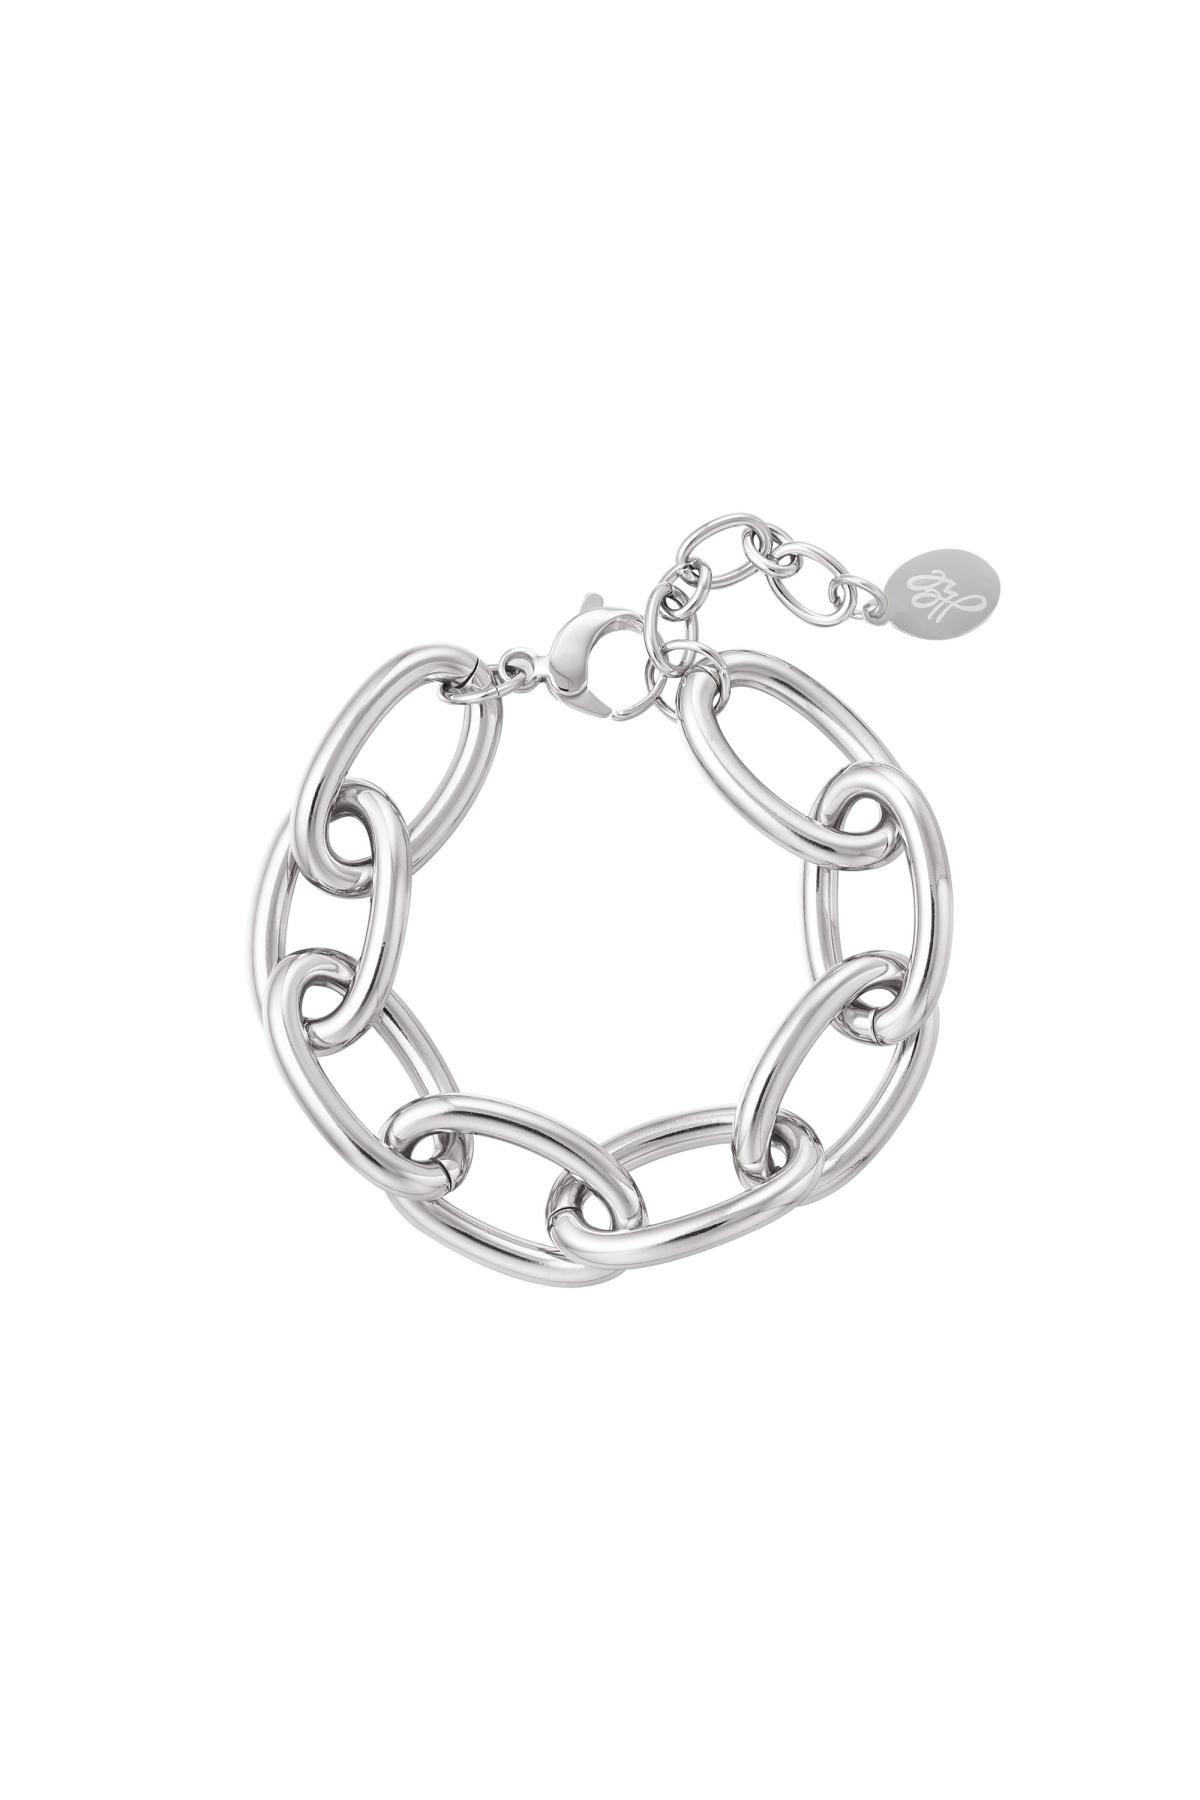 Bracciale grosso a catena con maglie larghe Silver Stainless Steel